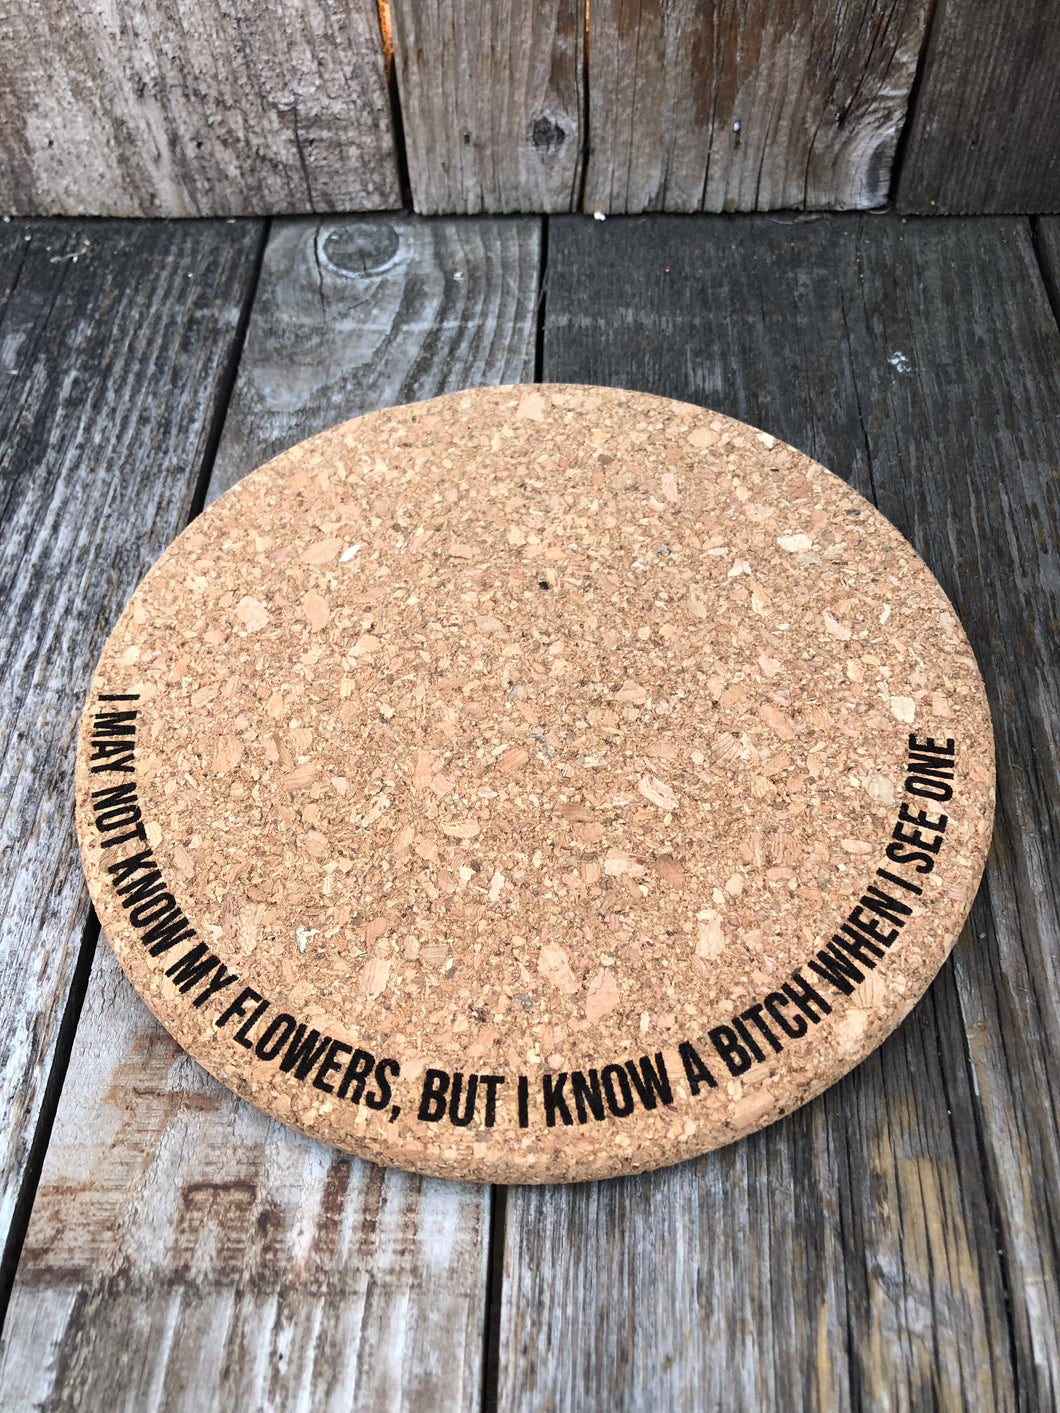 I May Not Know My Flowers, But I Know a Bitch When I See One Cork Plant Mat - Engraved Cork Round - Cork Bottom - No Plastic or Rubber - All Natural Material